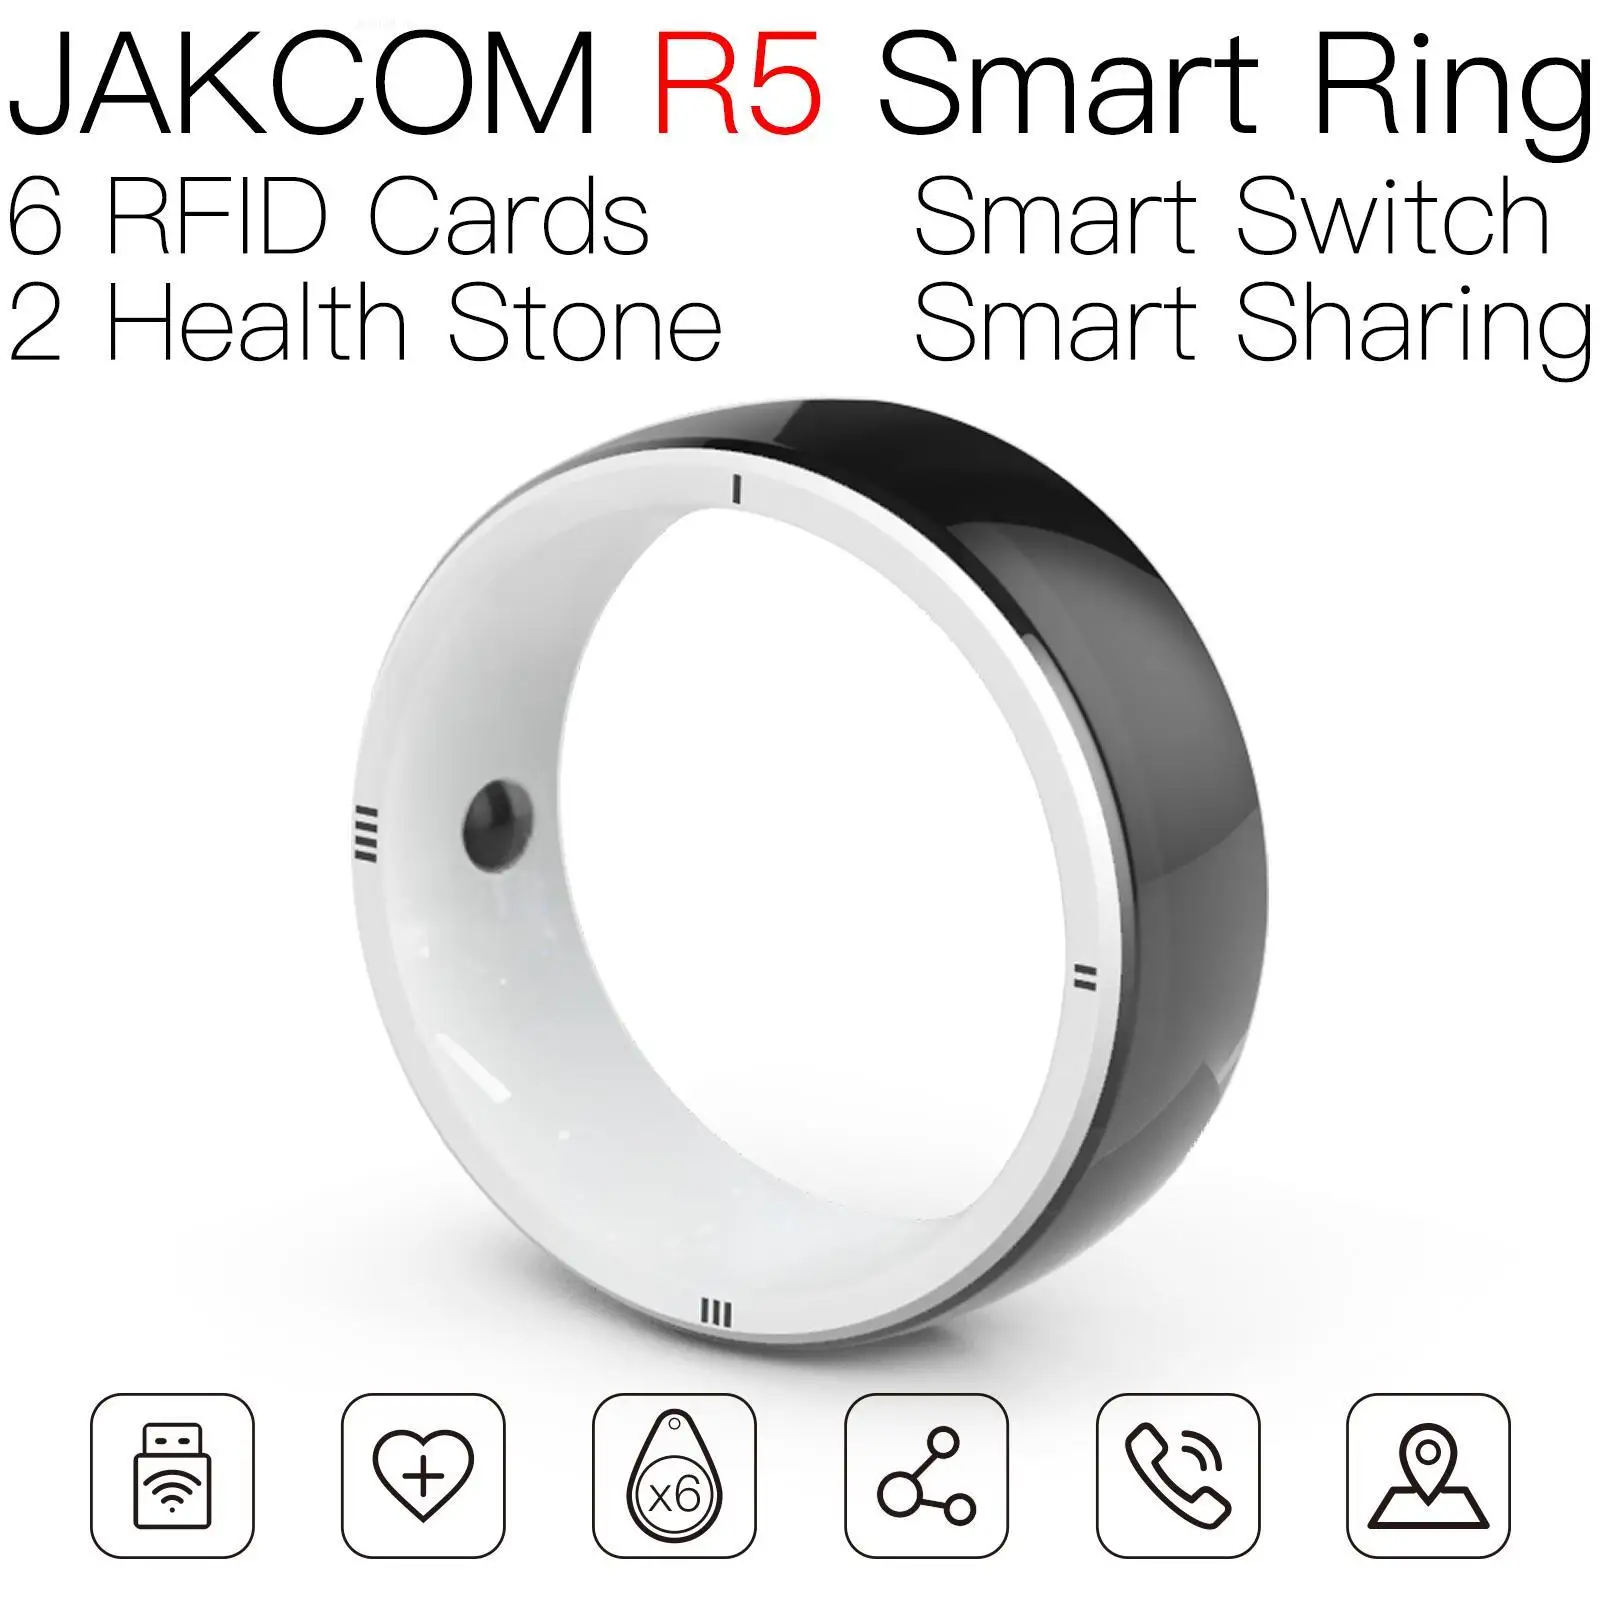 

JAKCOM R5 Smart Ring Newer than unfused id cards card rfid 1000pcs new user bonus deal with free shipping nfc sticker reader